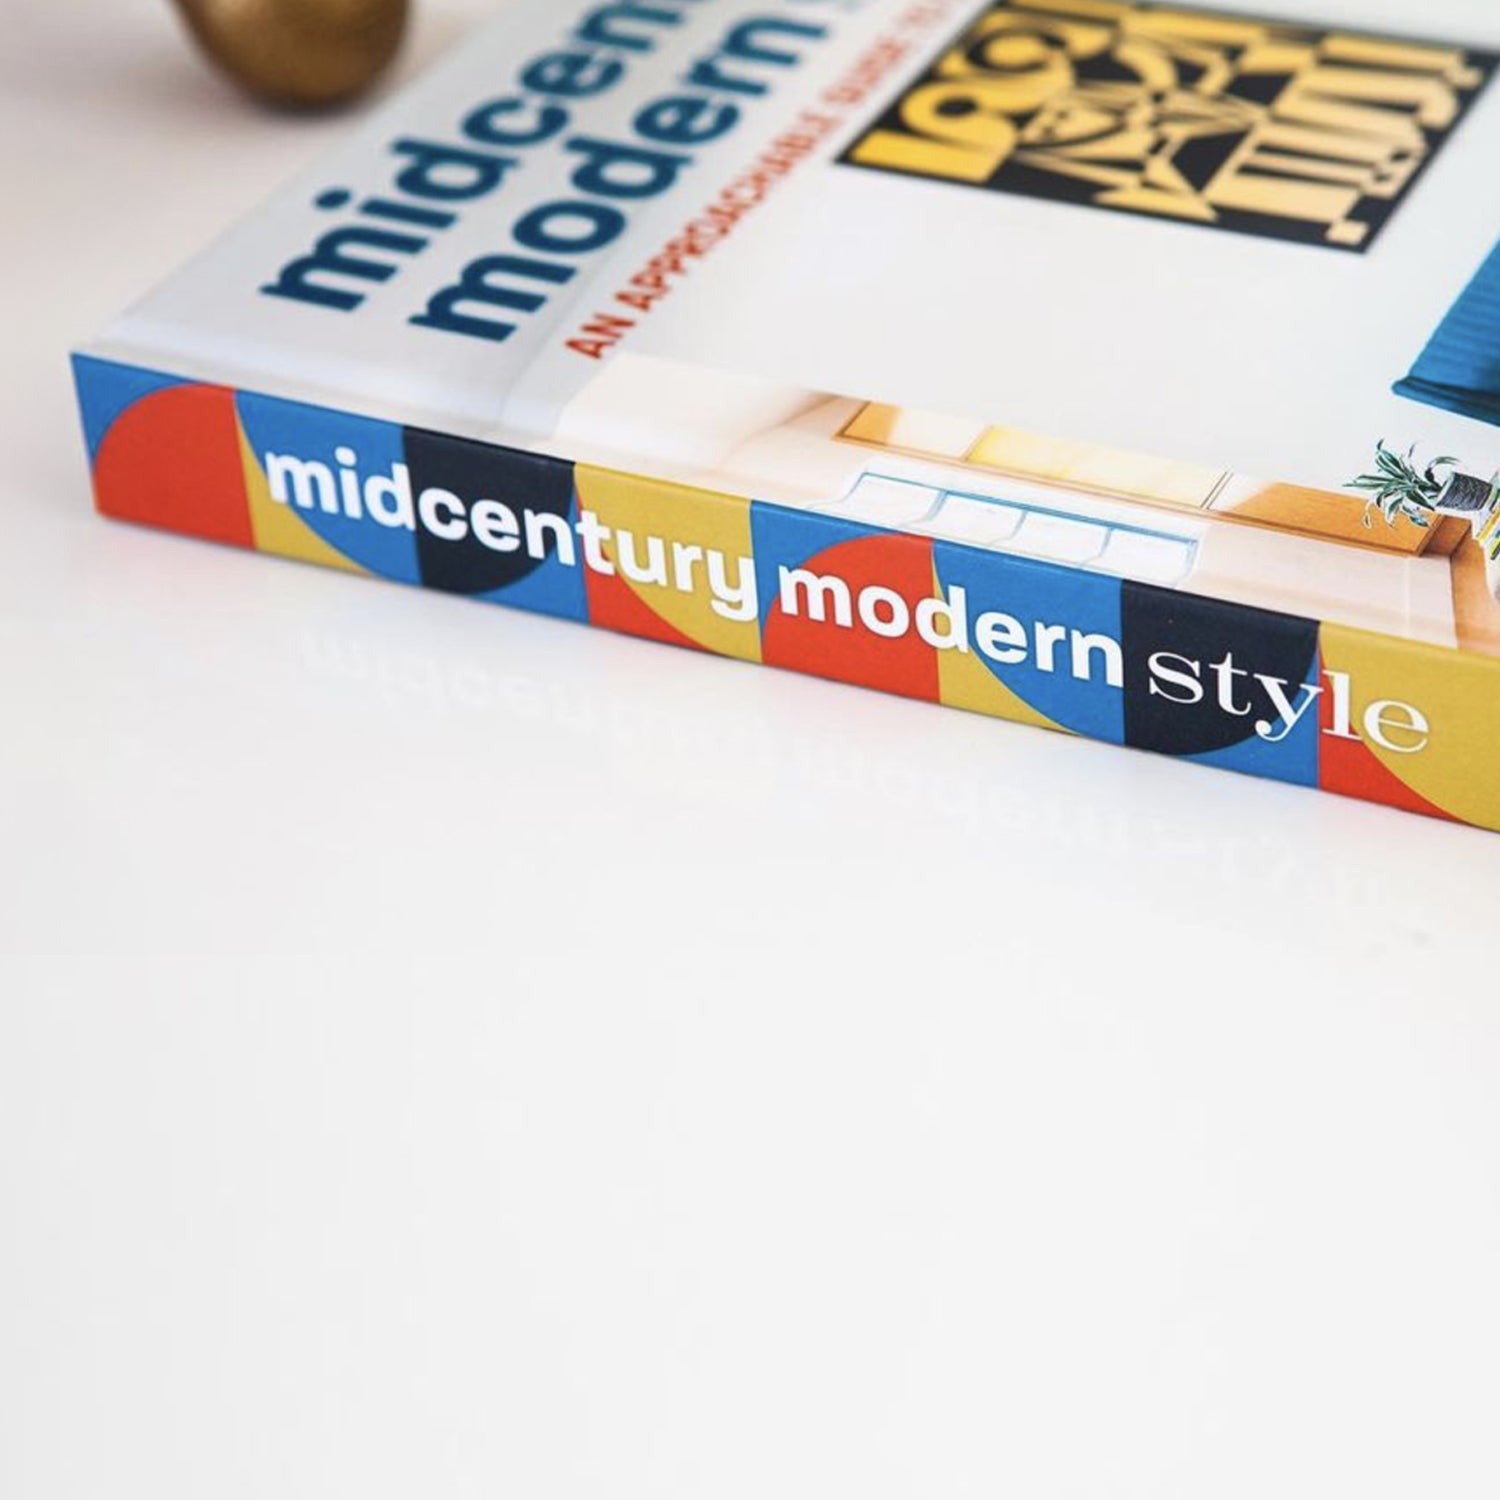 Midcentury Modern Style book on a white table.